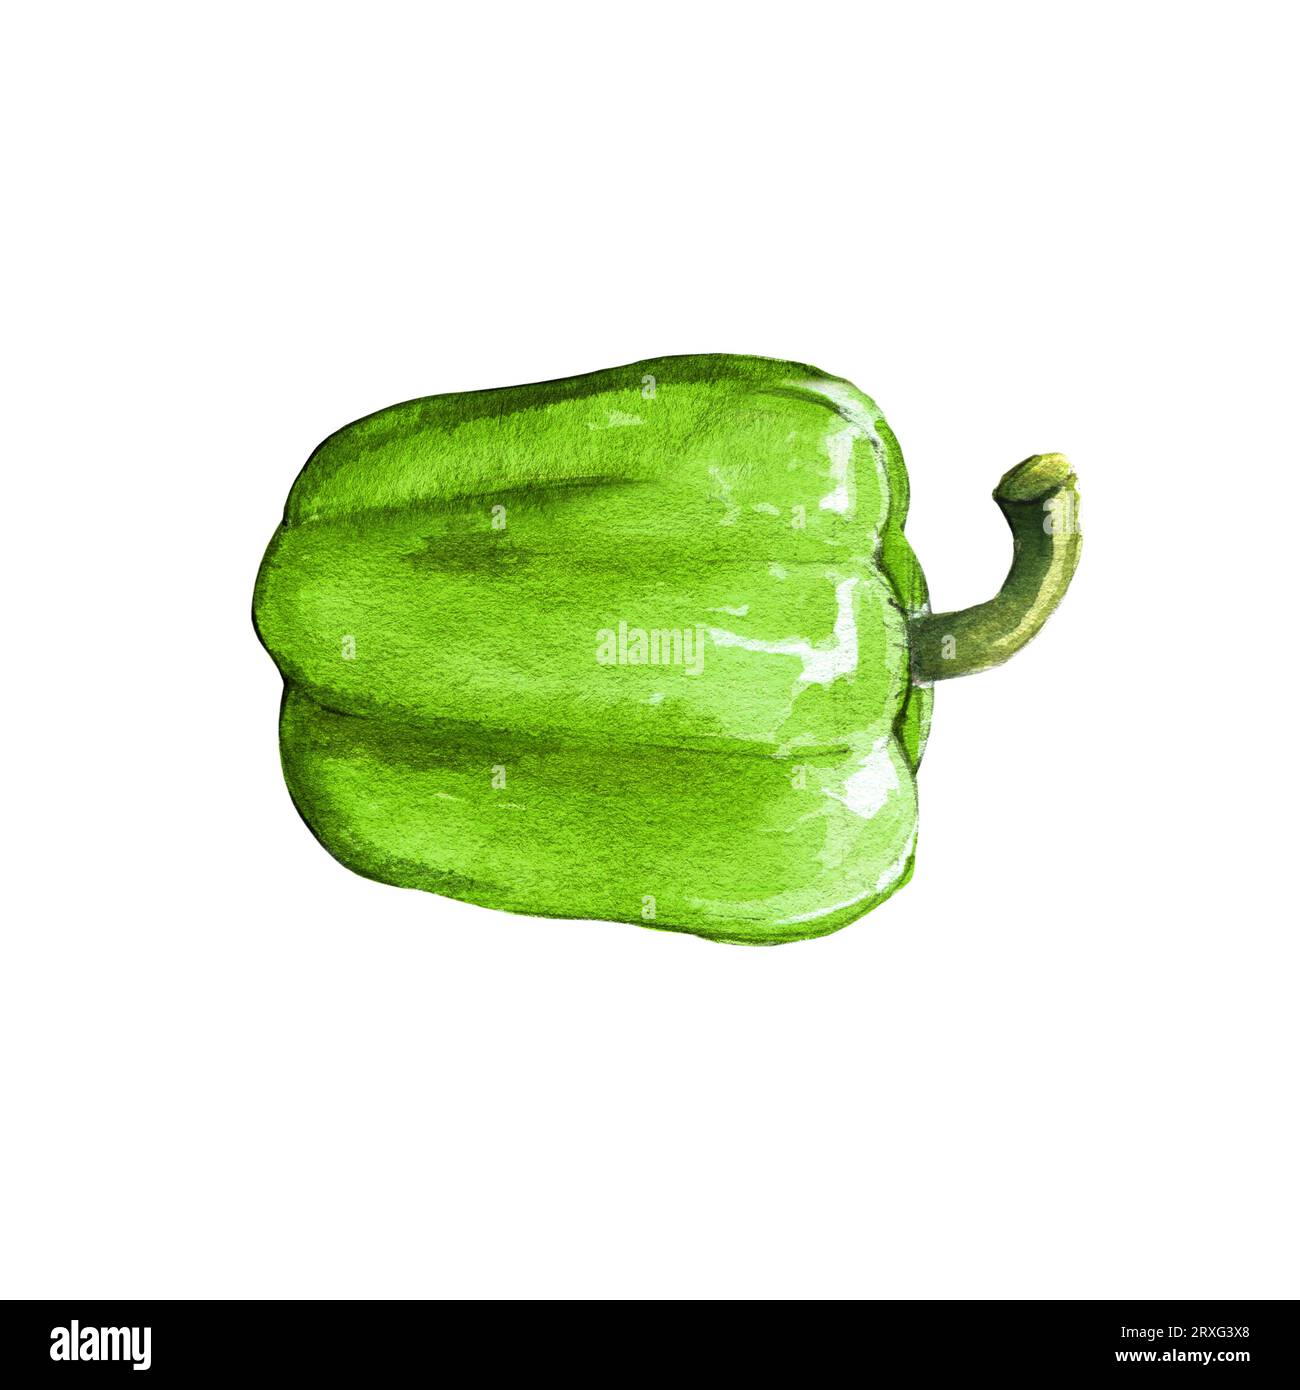 green bell pepper watercolor illustration on white background Stock Photo